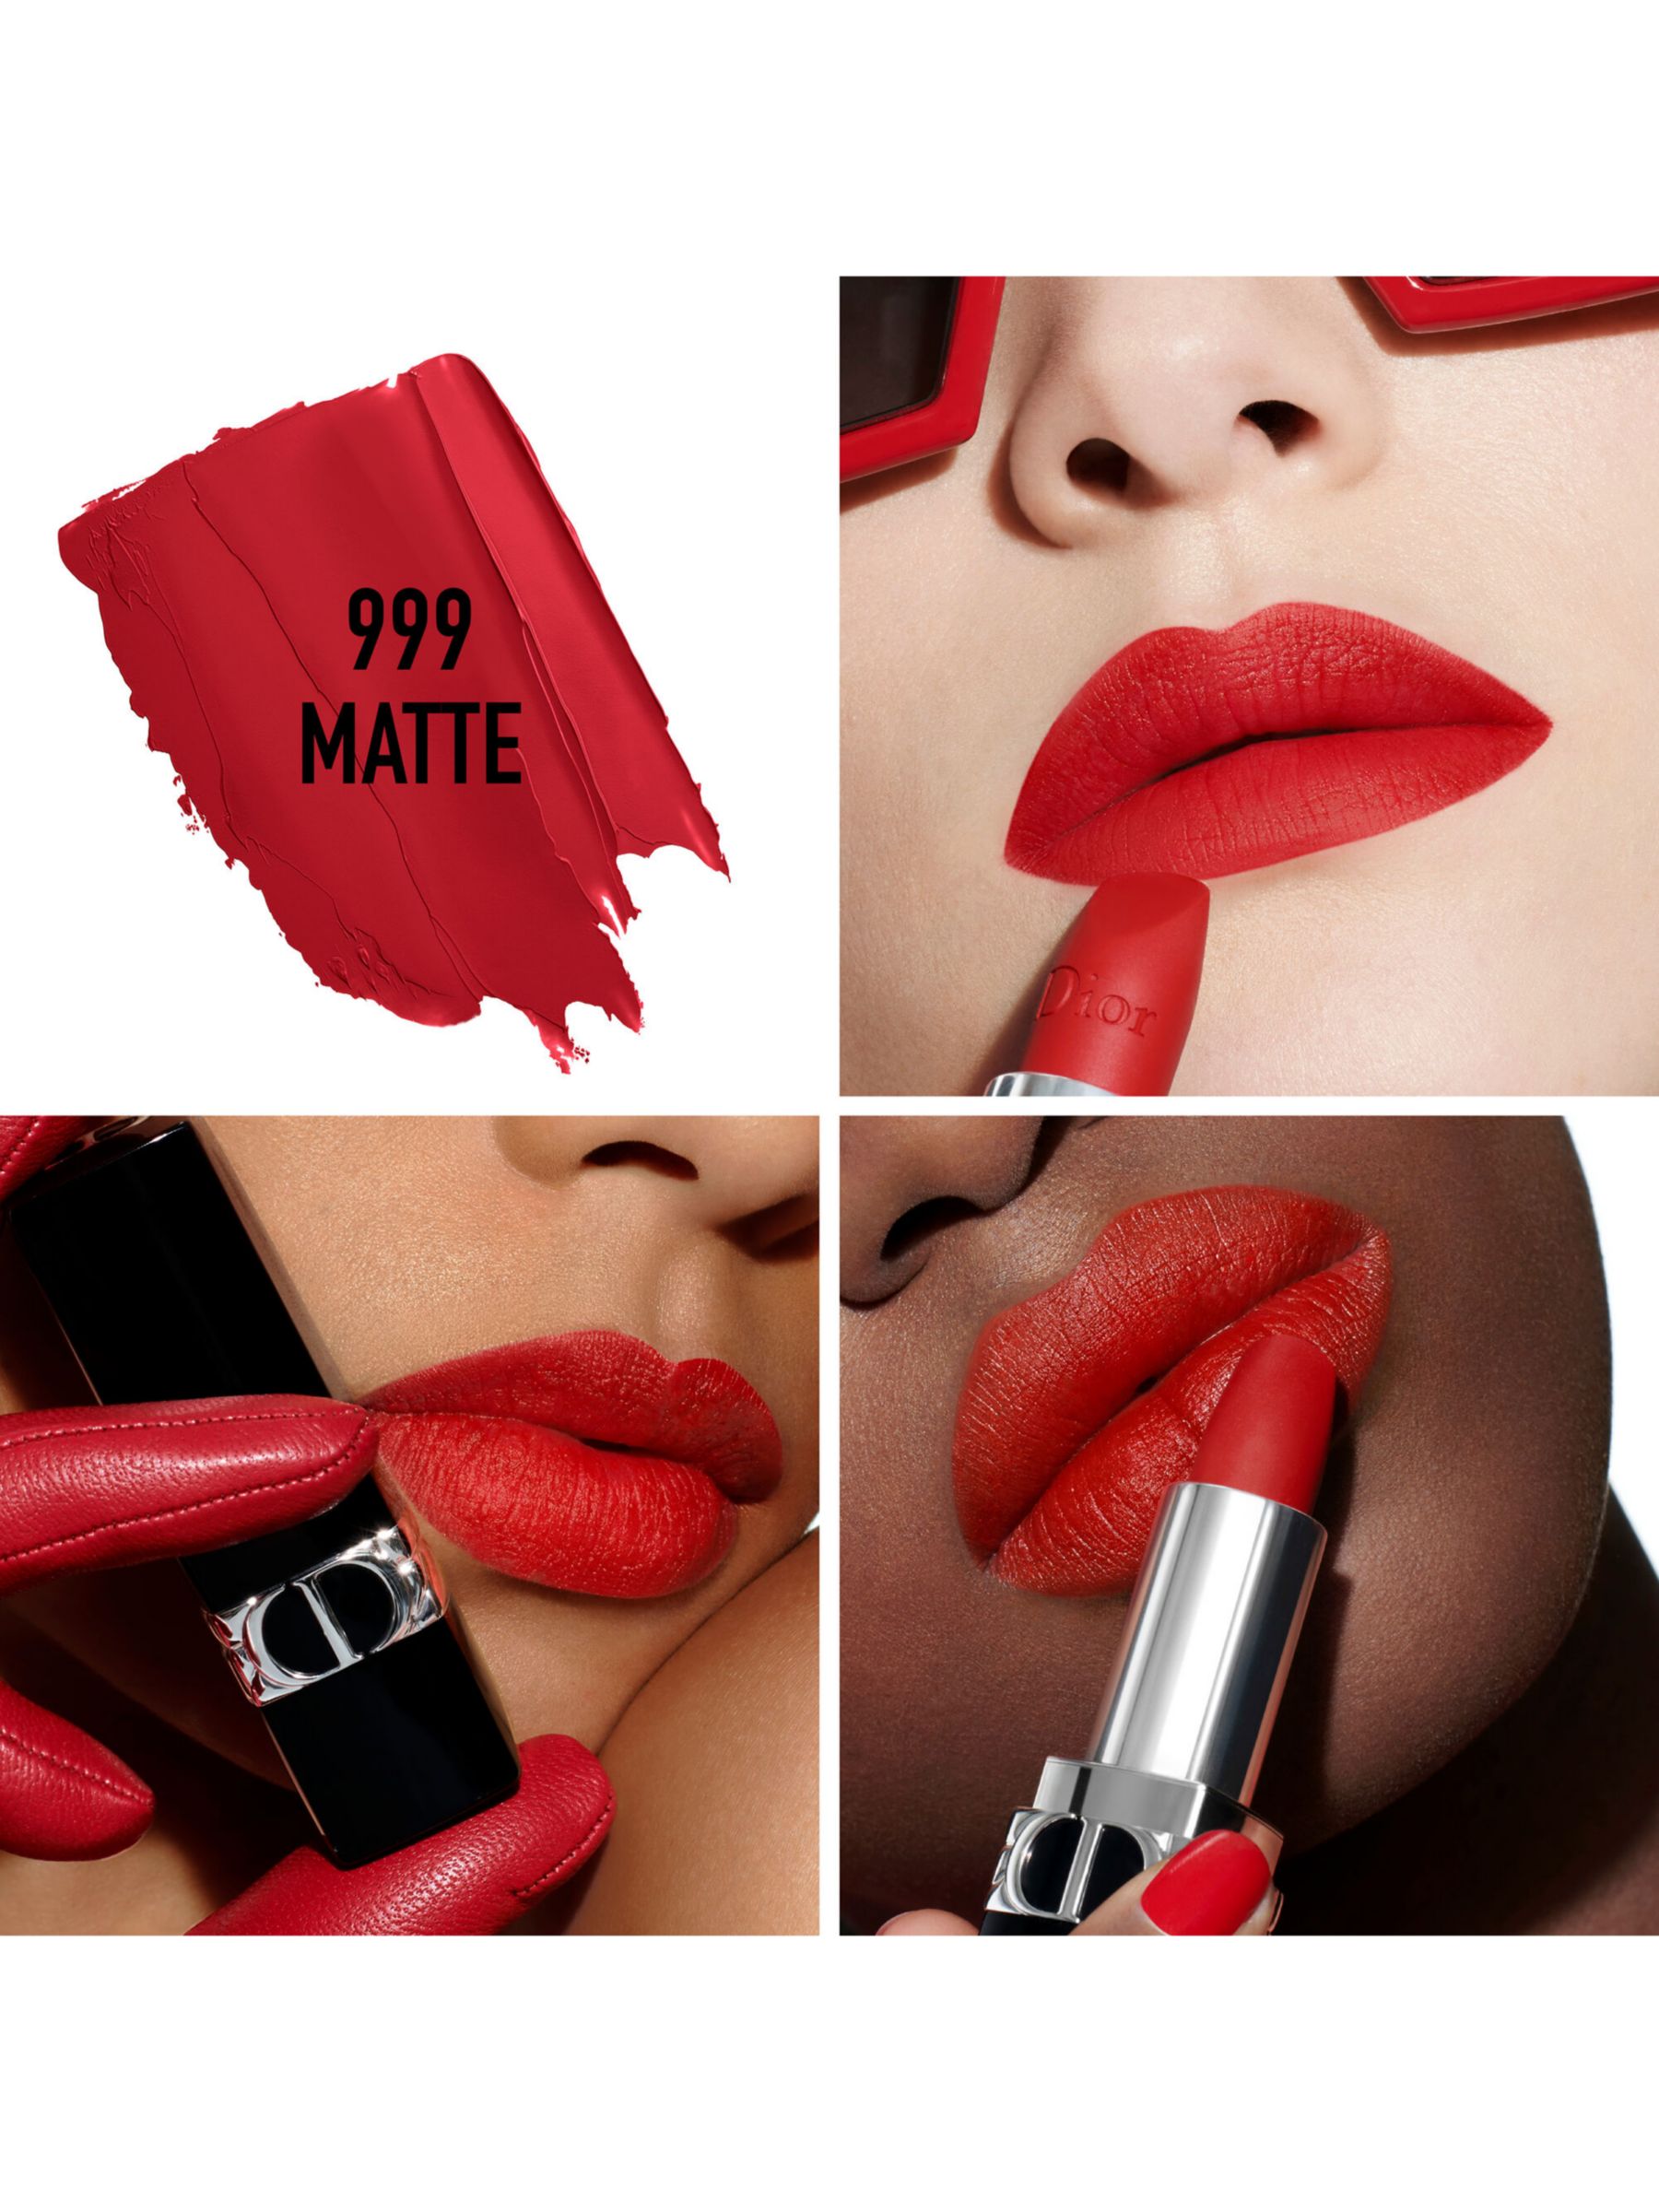 Dior Rouge Dior Couture Colour Lipstick Matte 999 Matte At John Lewis And Partners 